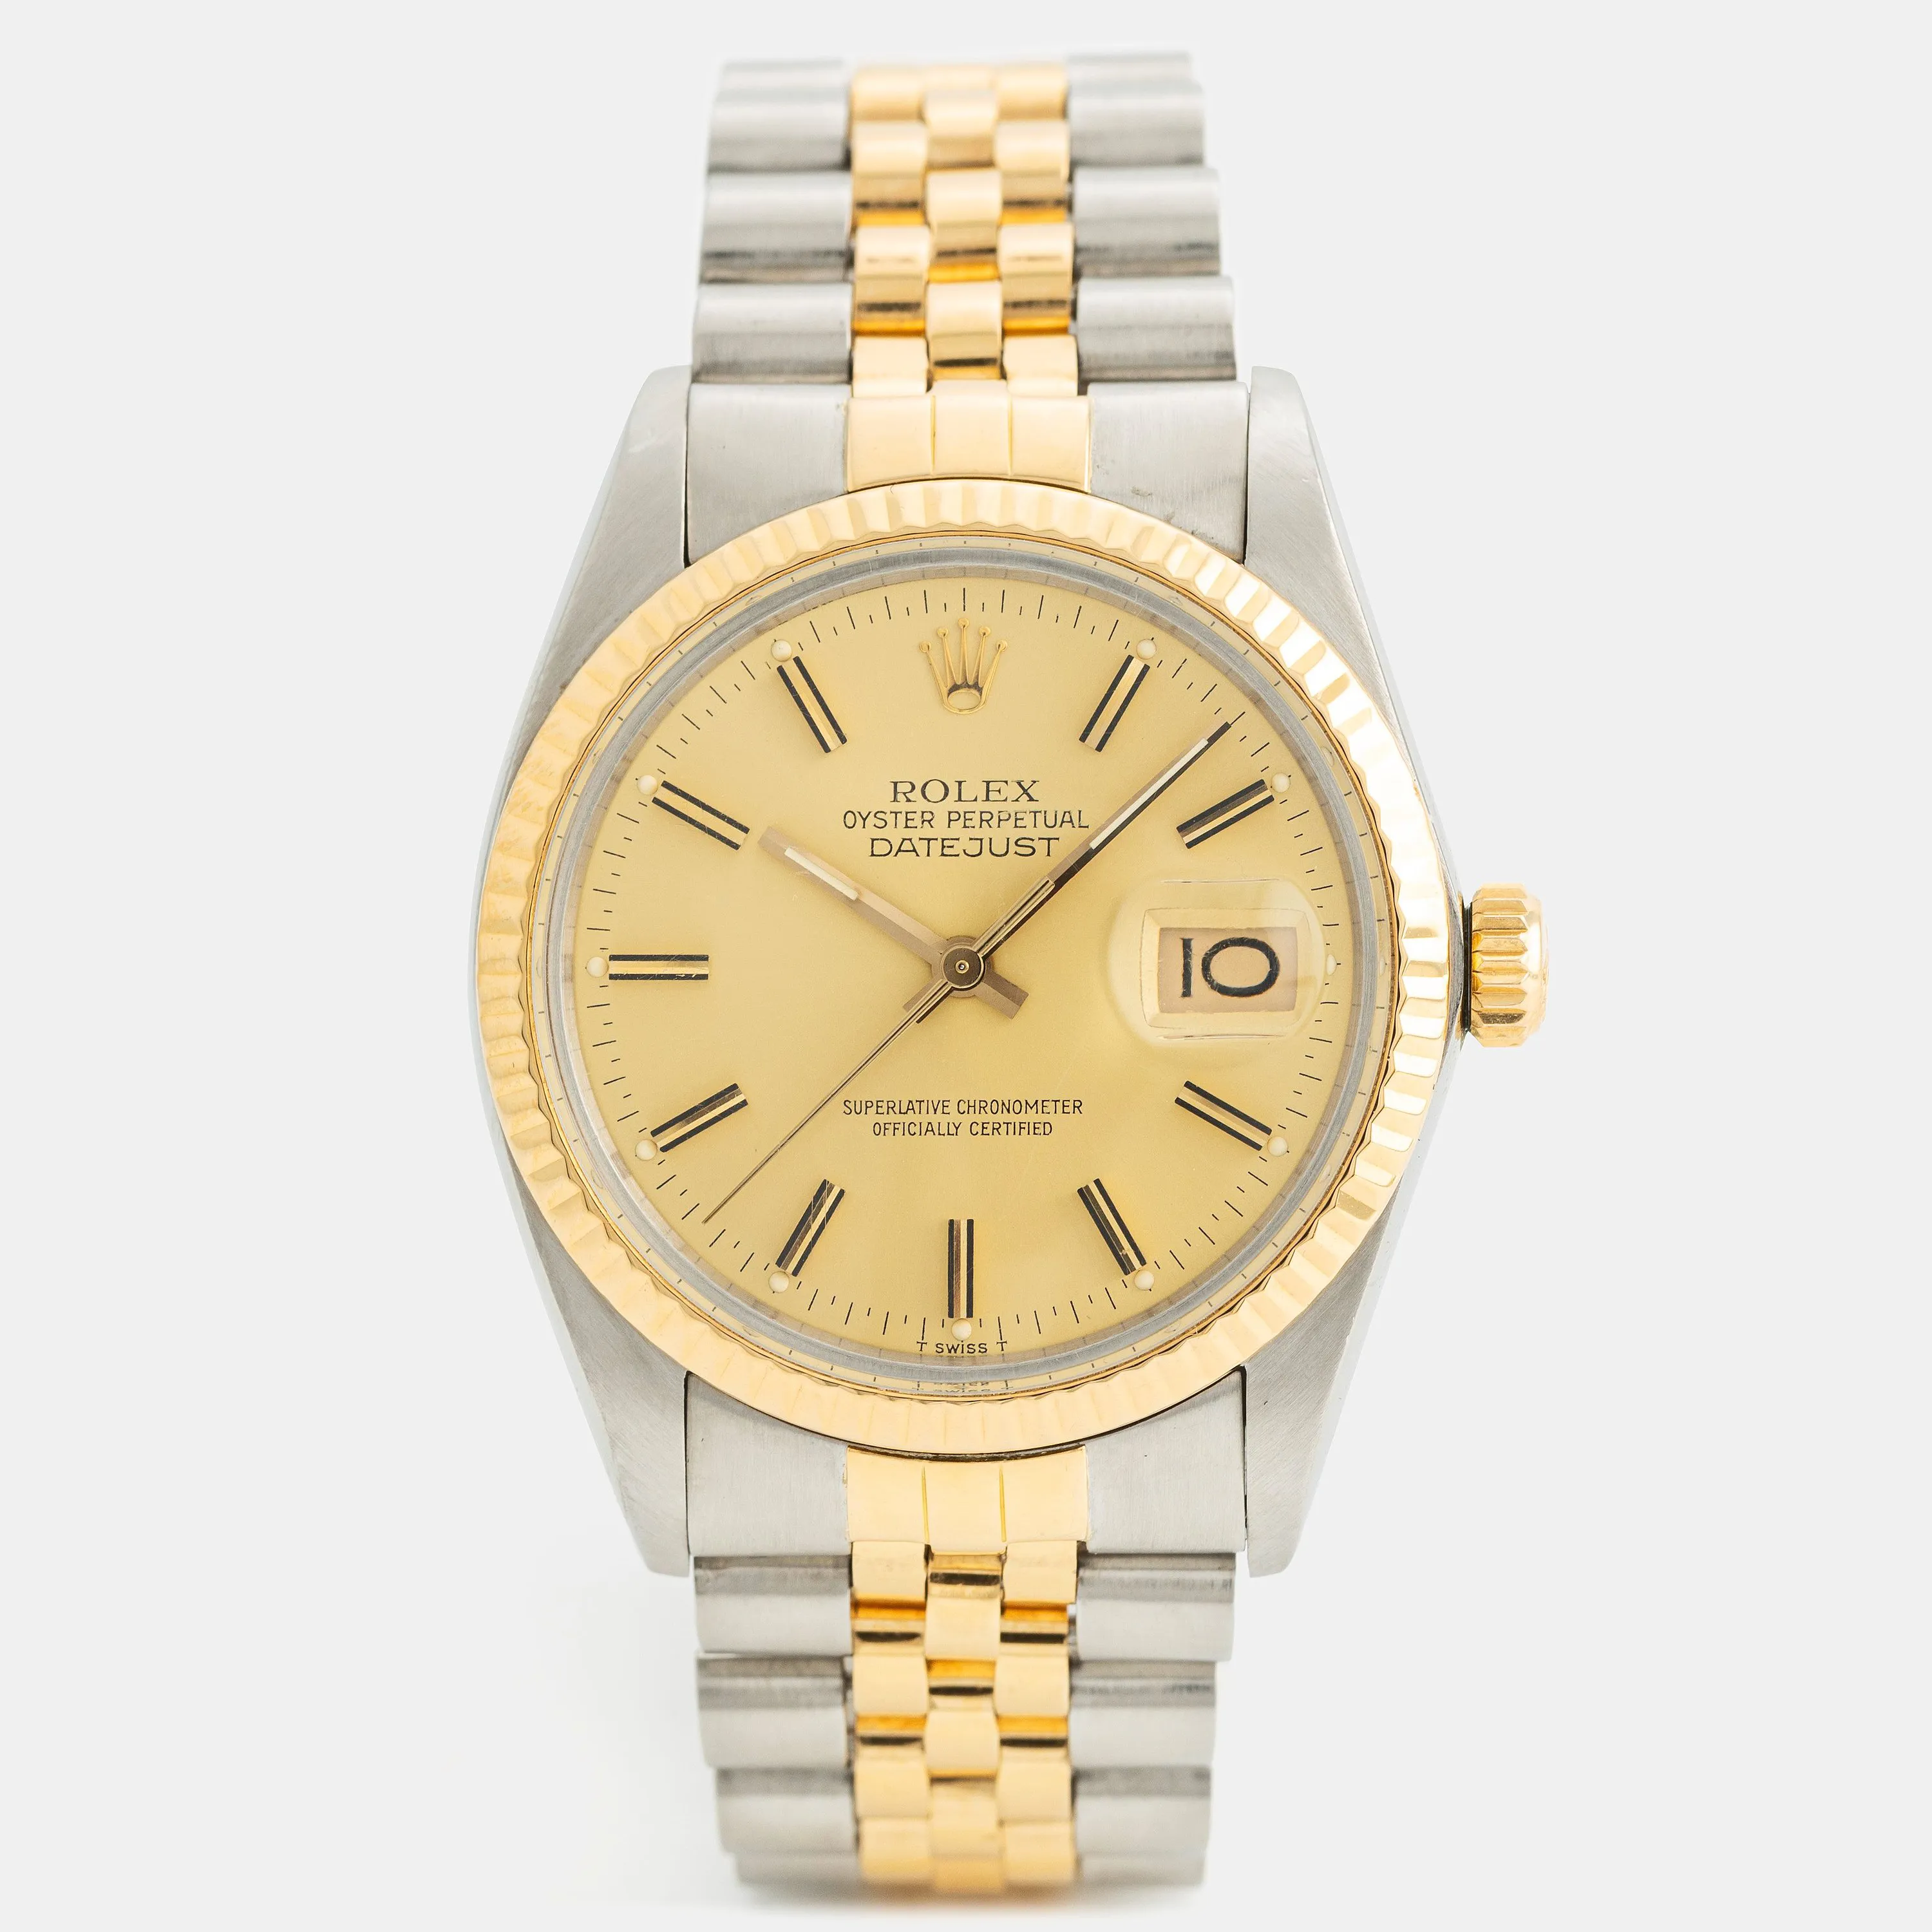 Rolex Datejust 16013 F 36mm Yellow gold and stainless steel